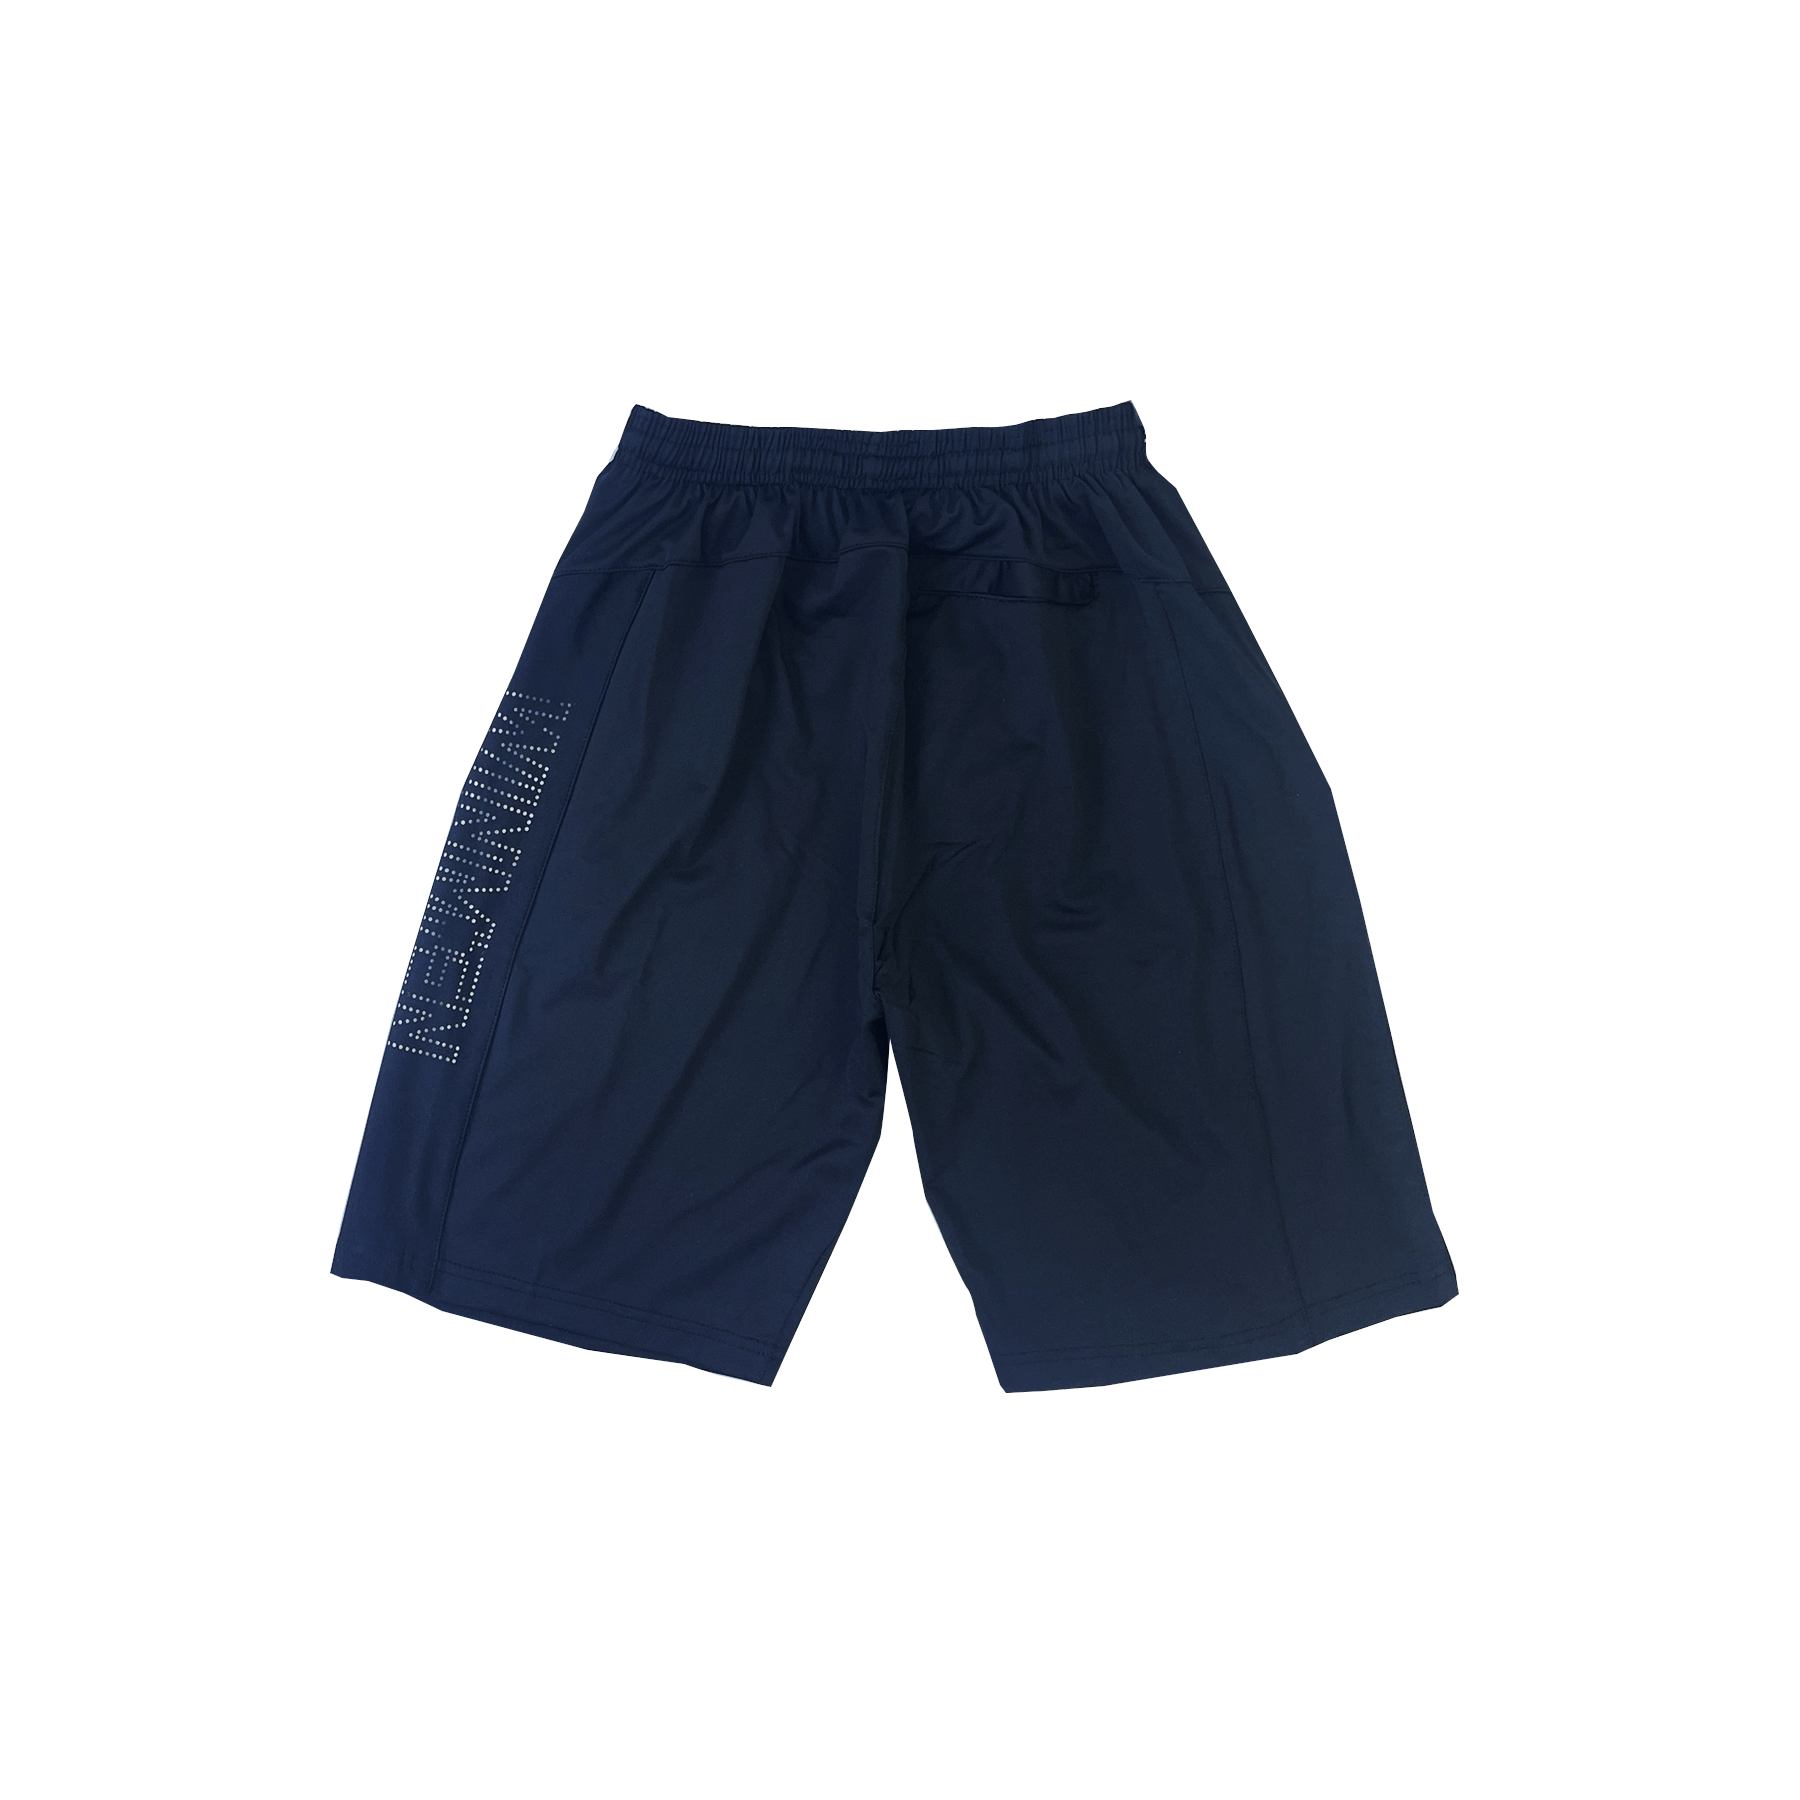  Cheap Price Men Short Pants High Quality Ready To Ship Odm Each One In Opp Bag Made In Vietnam Manufacturer